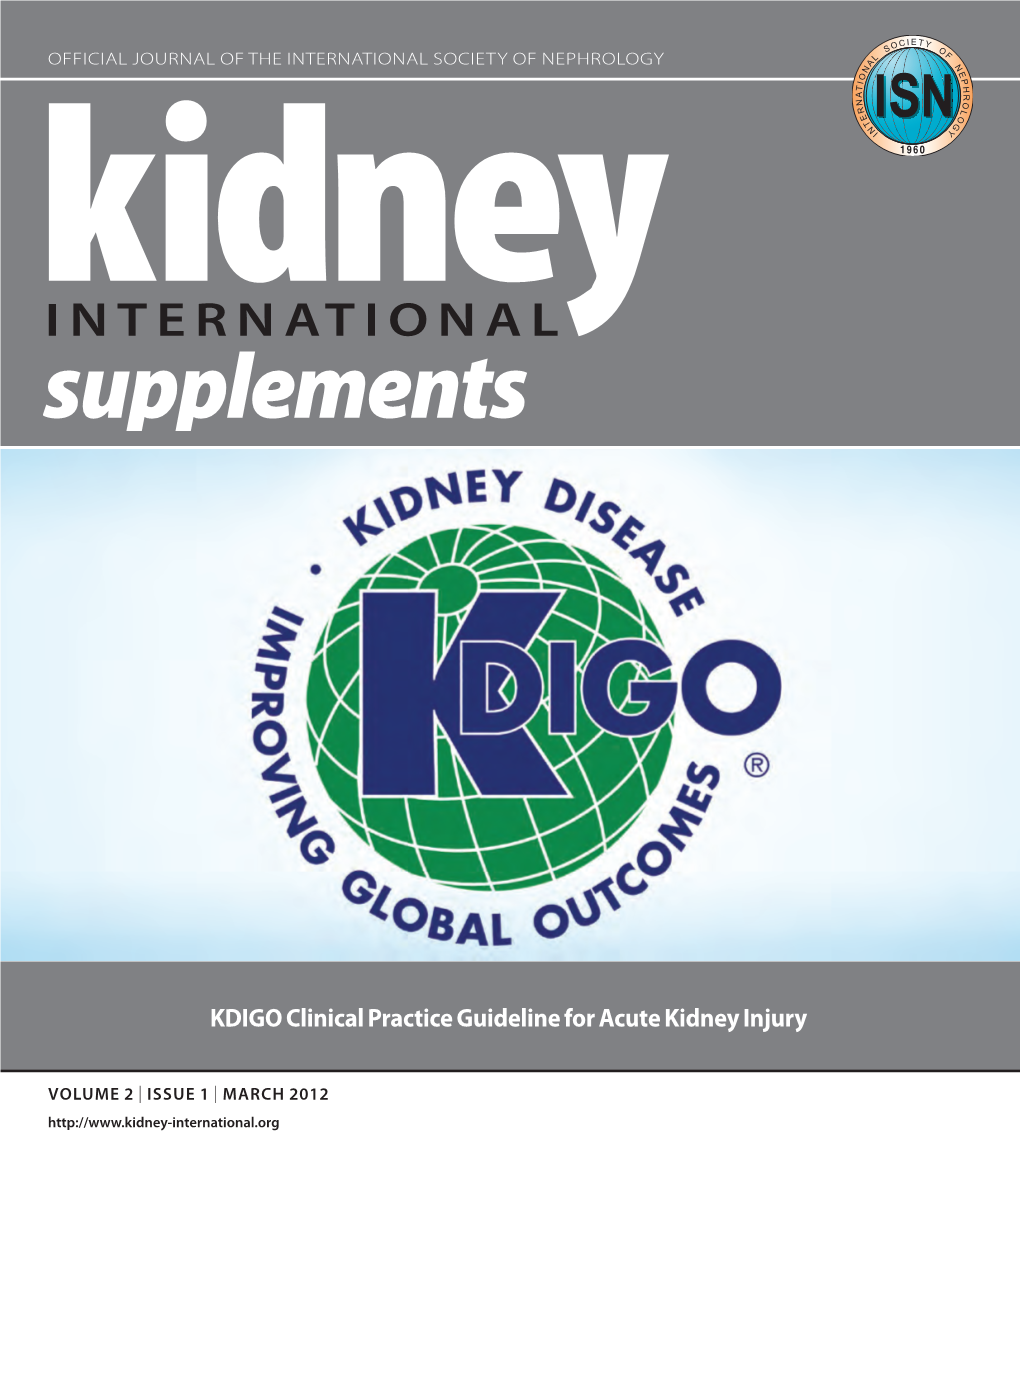 KDIGO Clinical Practice Guideline for Acute Kidney Injury